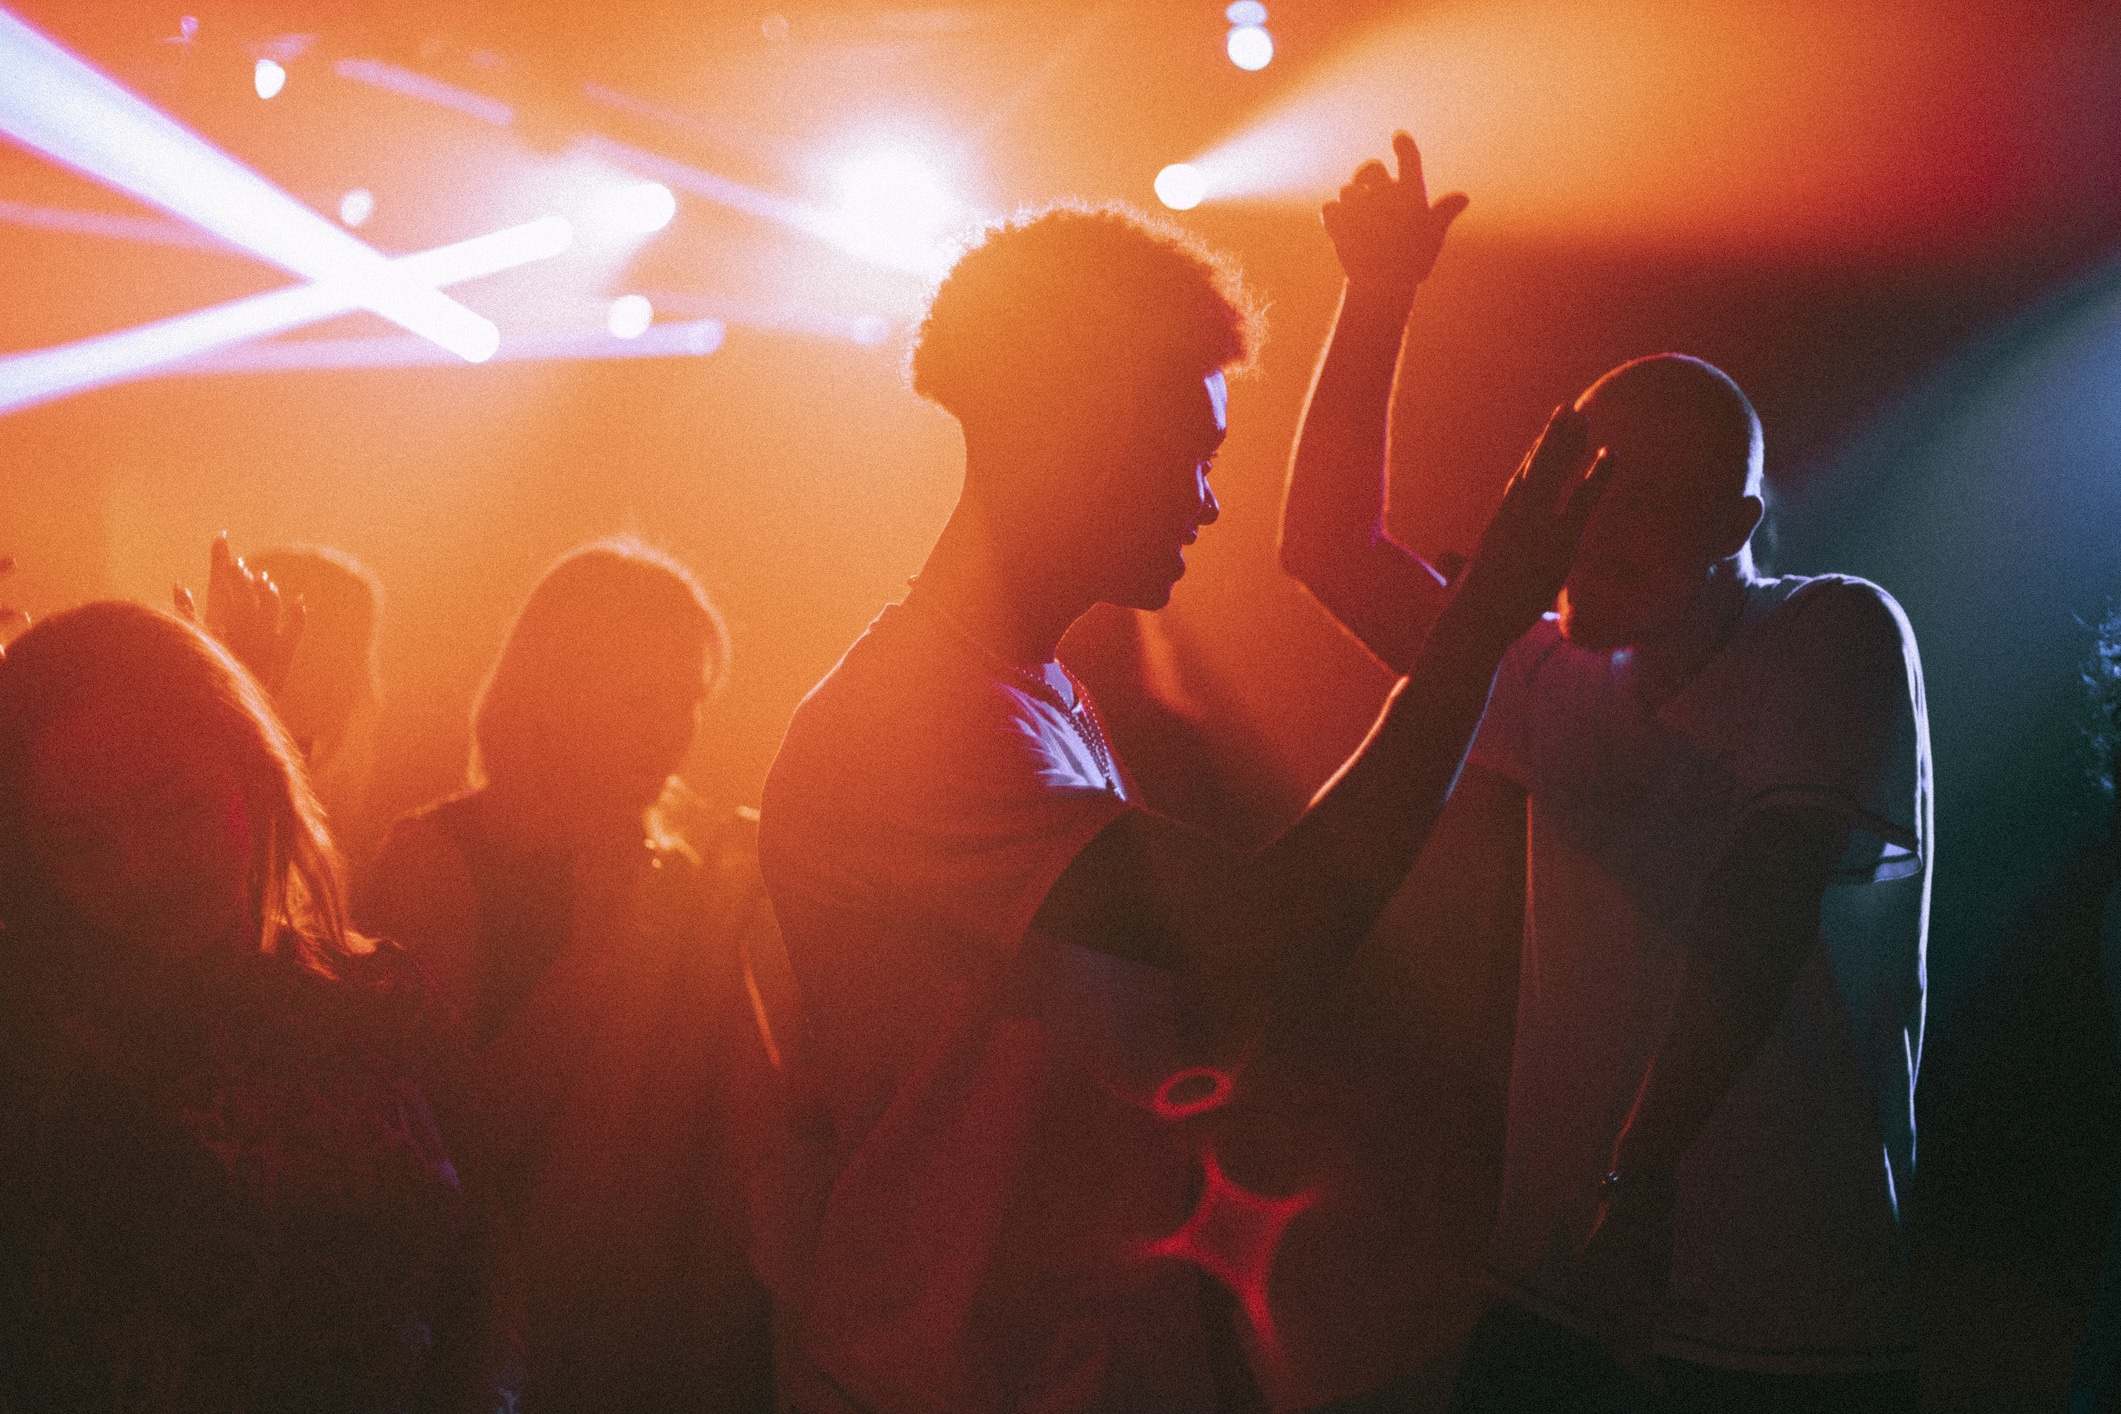 Young men and women dancing against illuminated red spotlights at nightclub